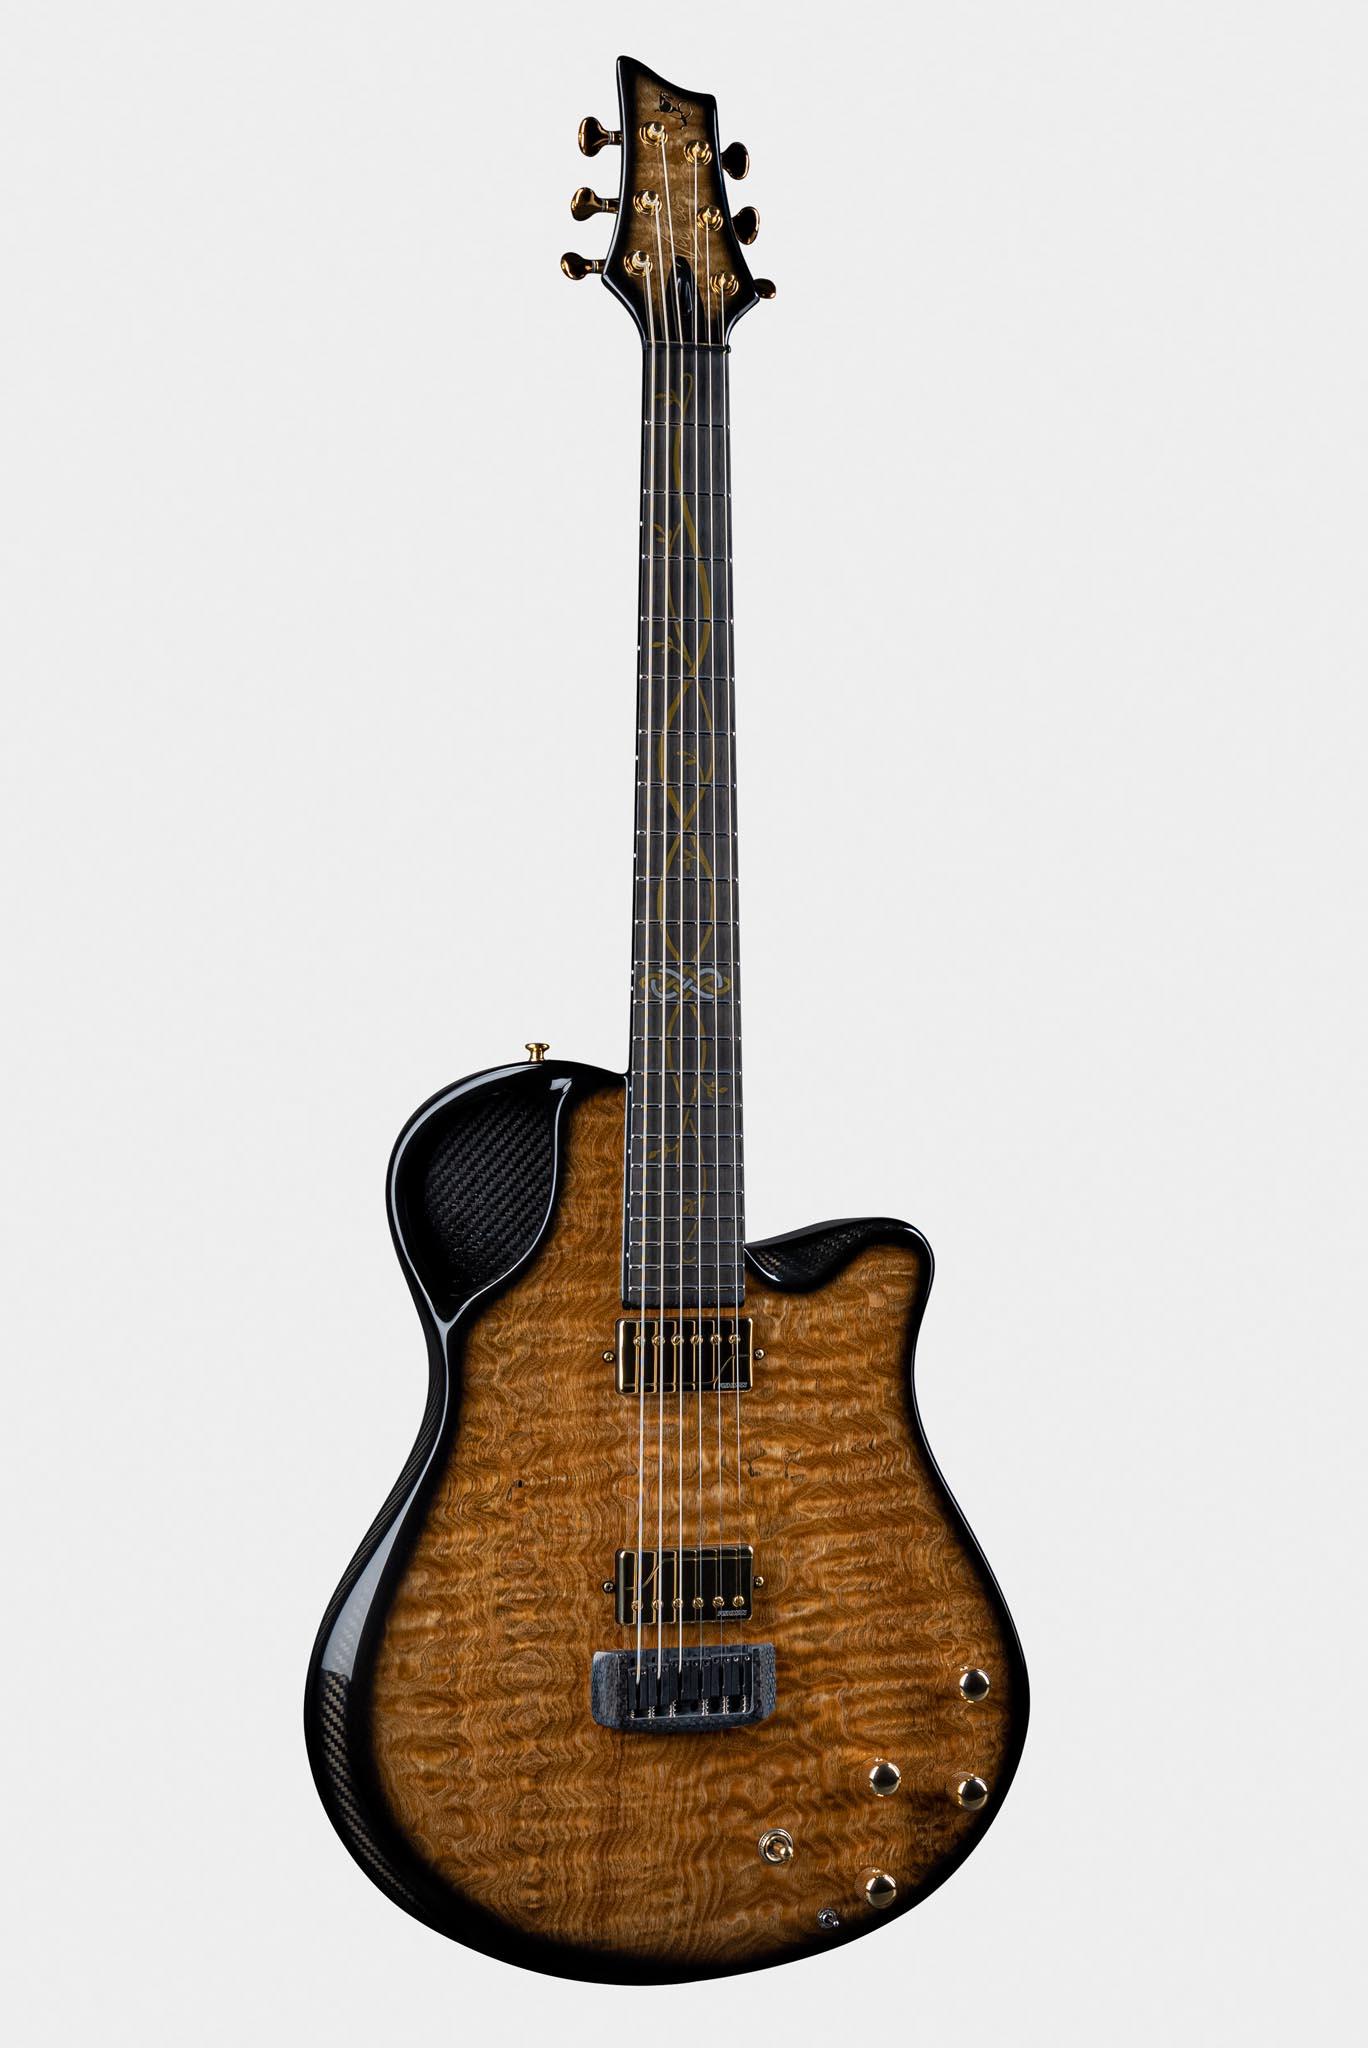 Brown Emerald Virtuo Guitar with Natural Wood Pattern